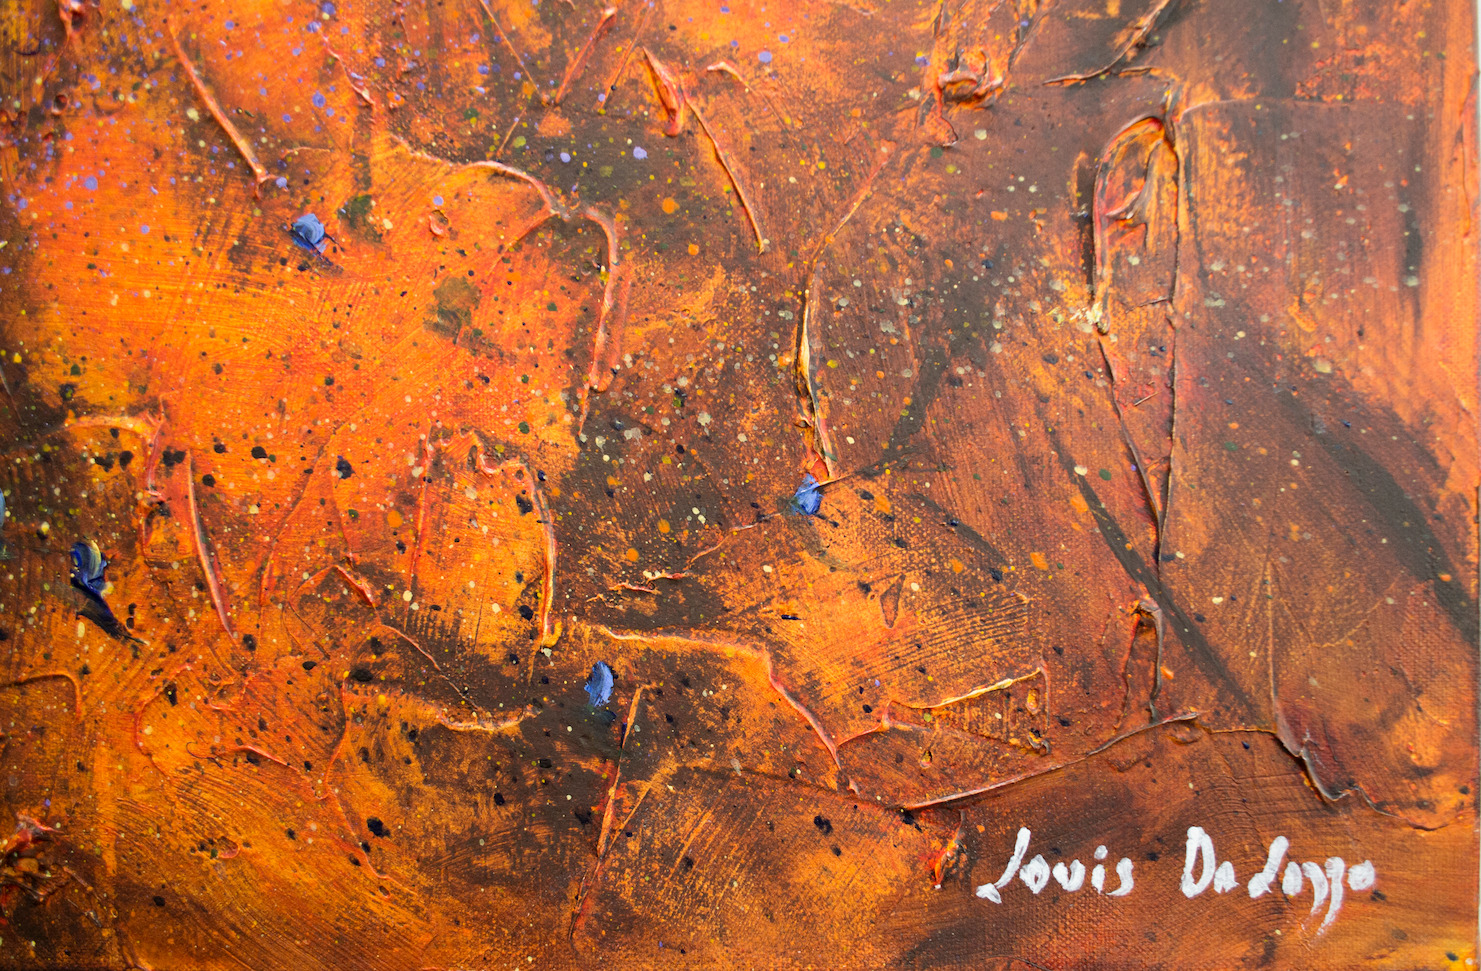 Close Up Signature Of Acrylic Painting "Edge of The Simpson Desert" By Louis Dalozzo